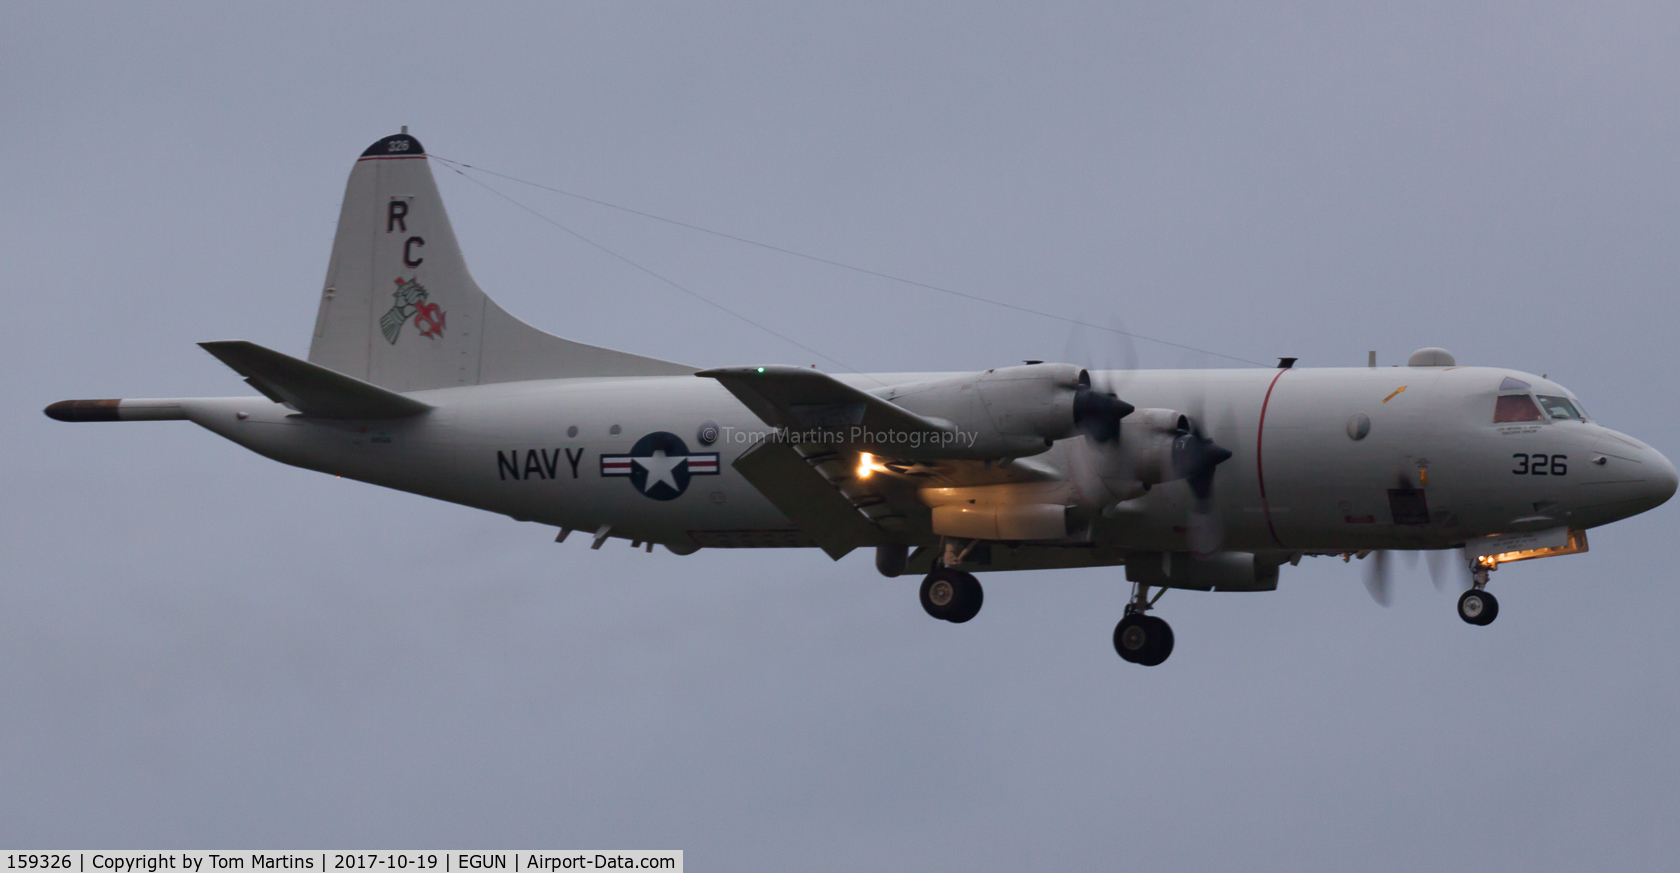 159326, Lockheed P-3C AIP+ Orion C/N 285A-5616, Shot at Mildenhall